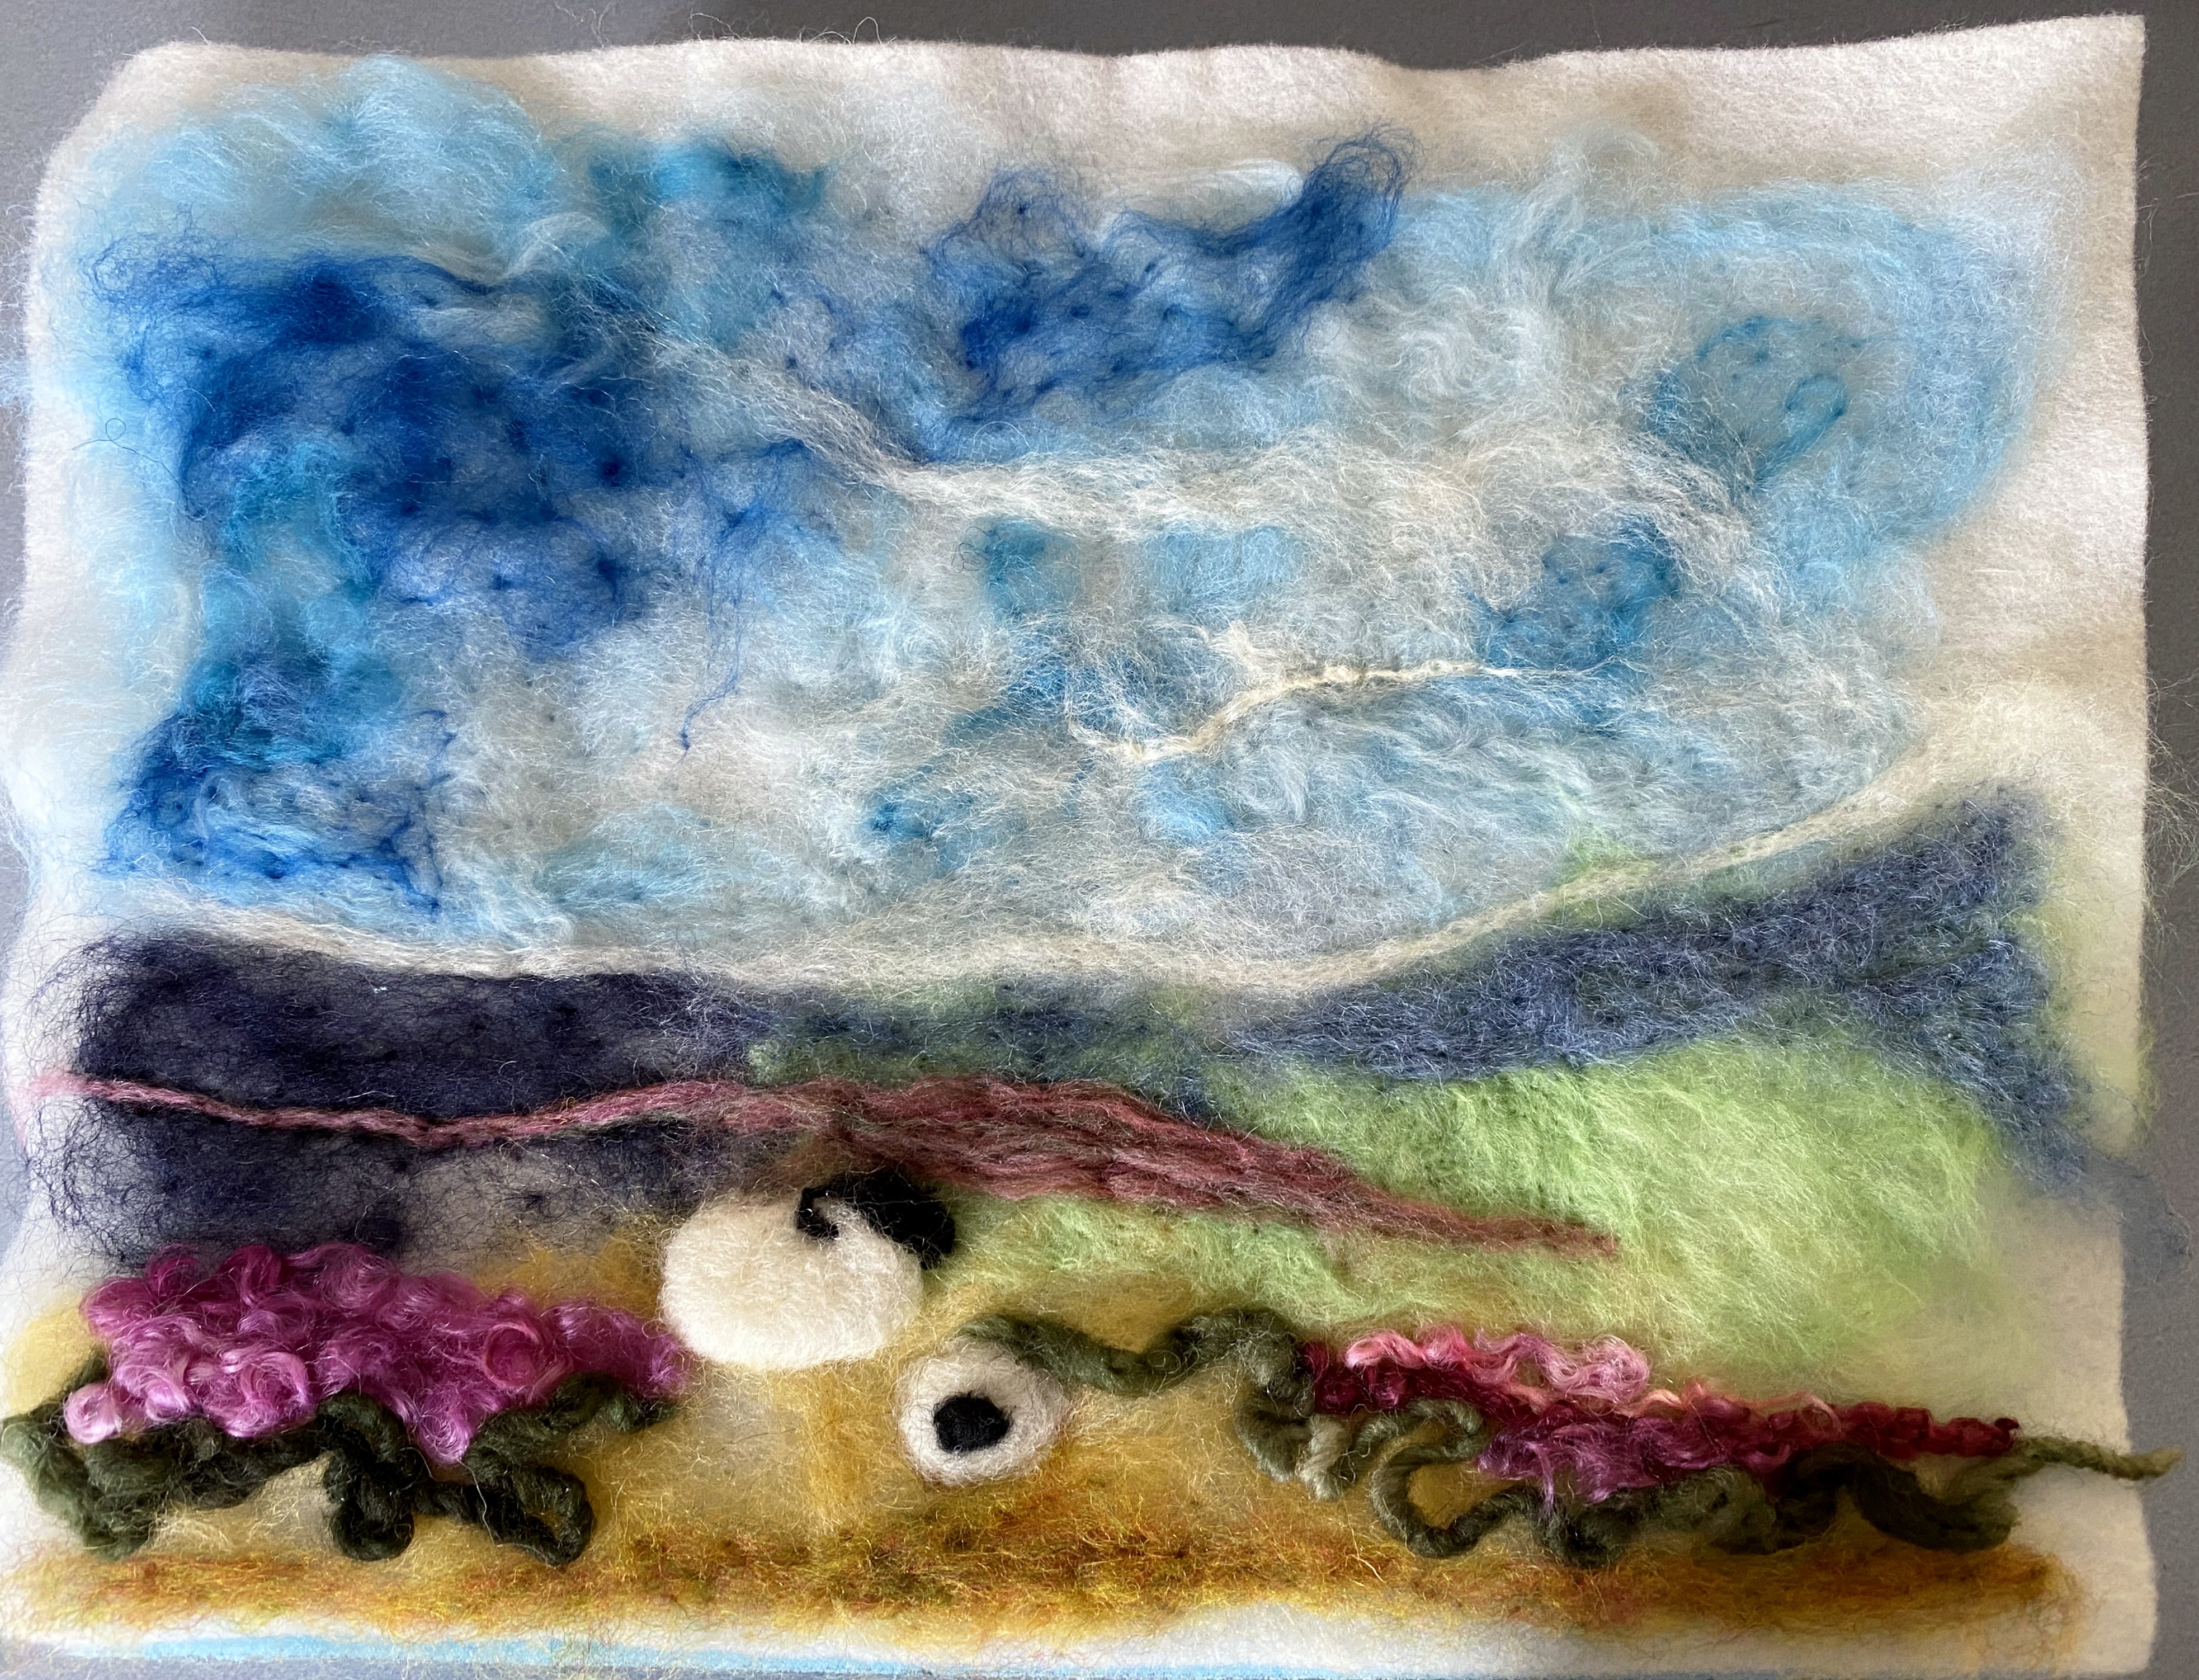 student's work at "Dry Felt Landscape" workshop by Nicola Hulme, May 2022